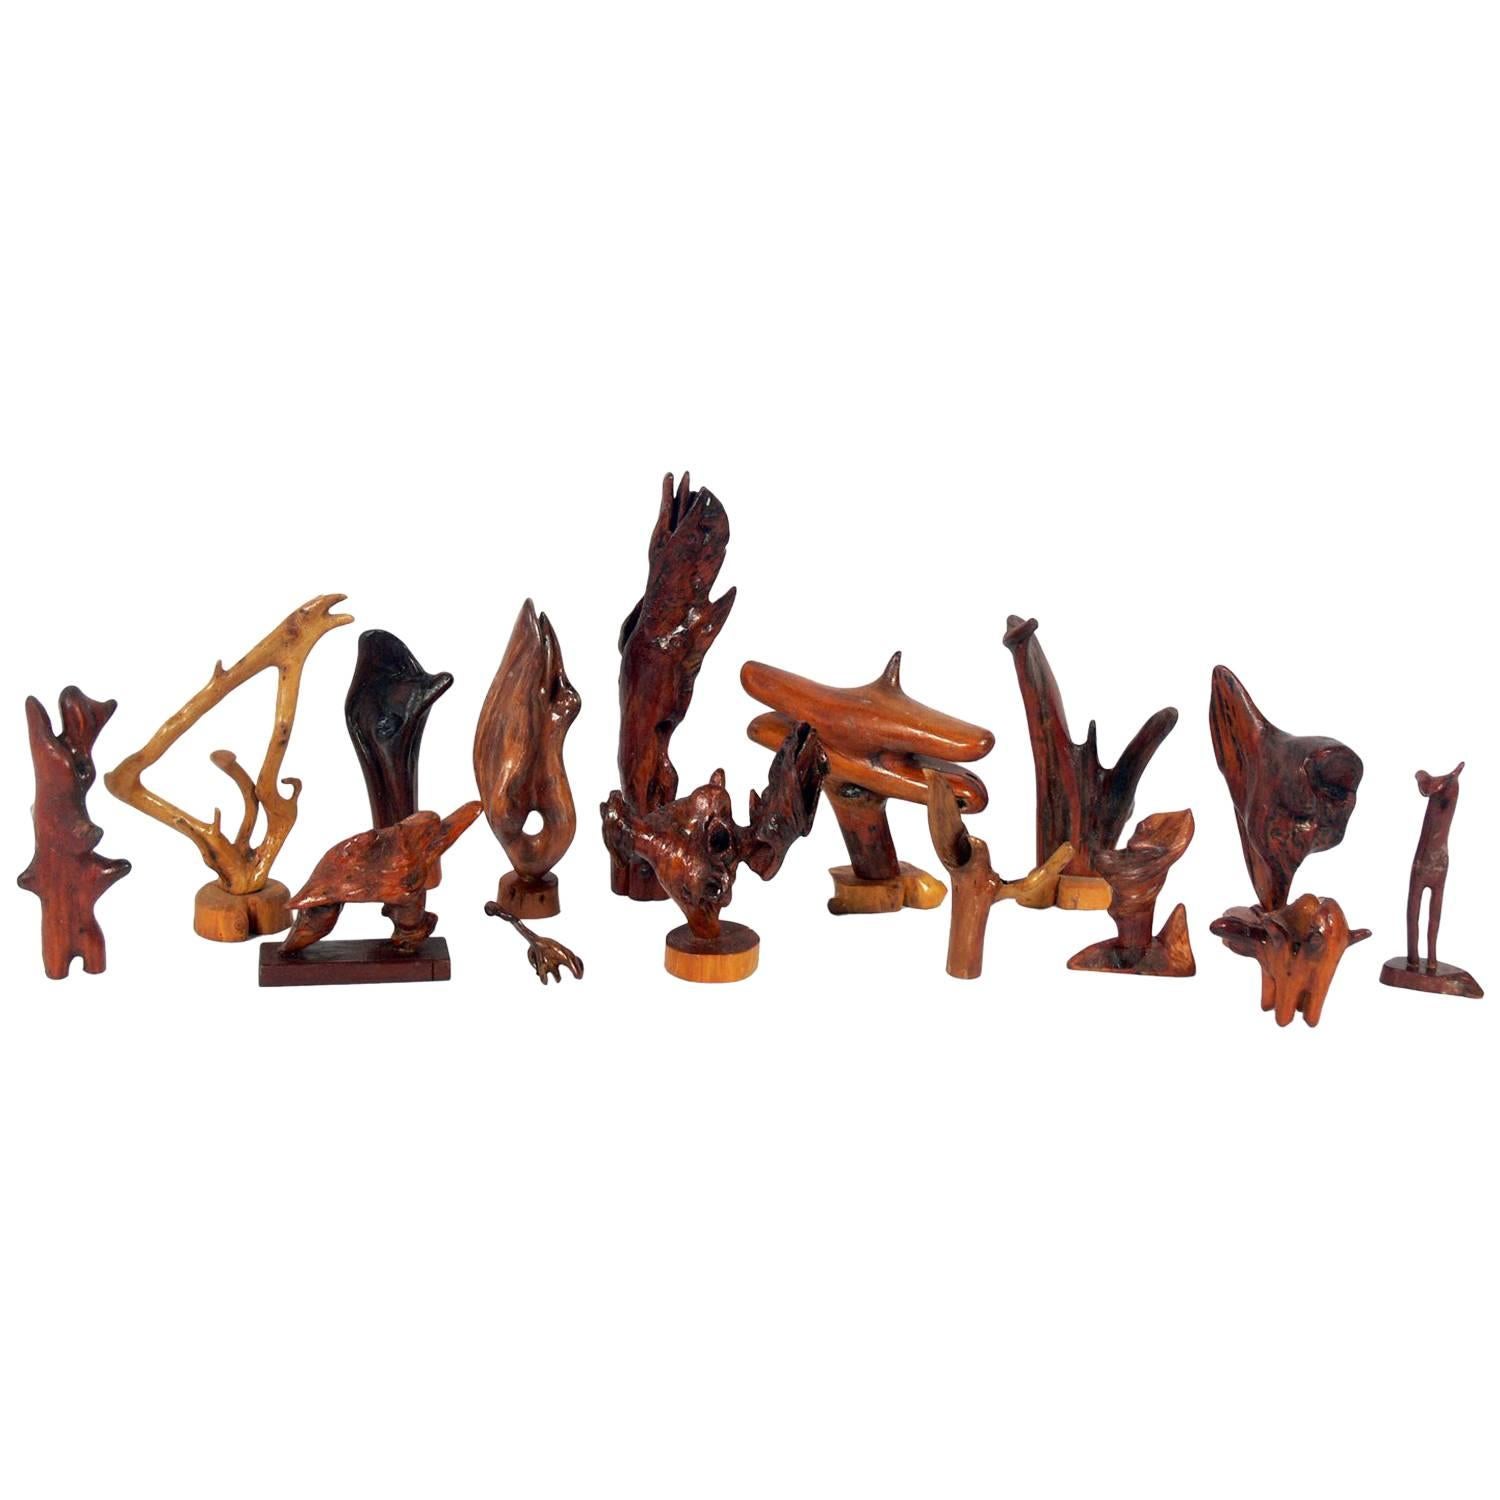 Collection of Sculptural Wood Roots